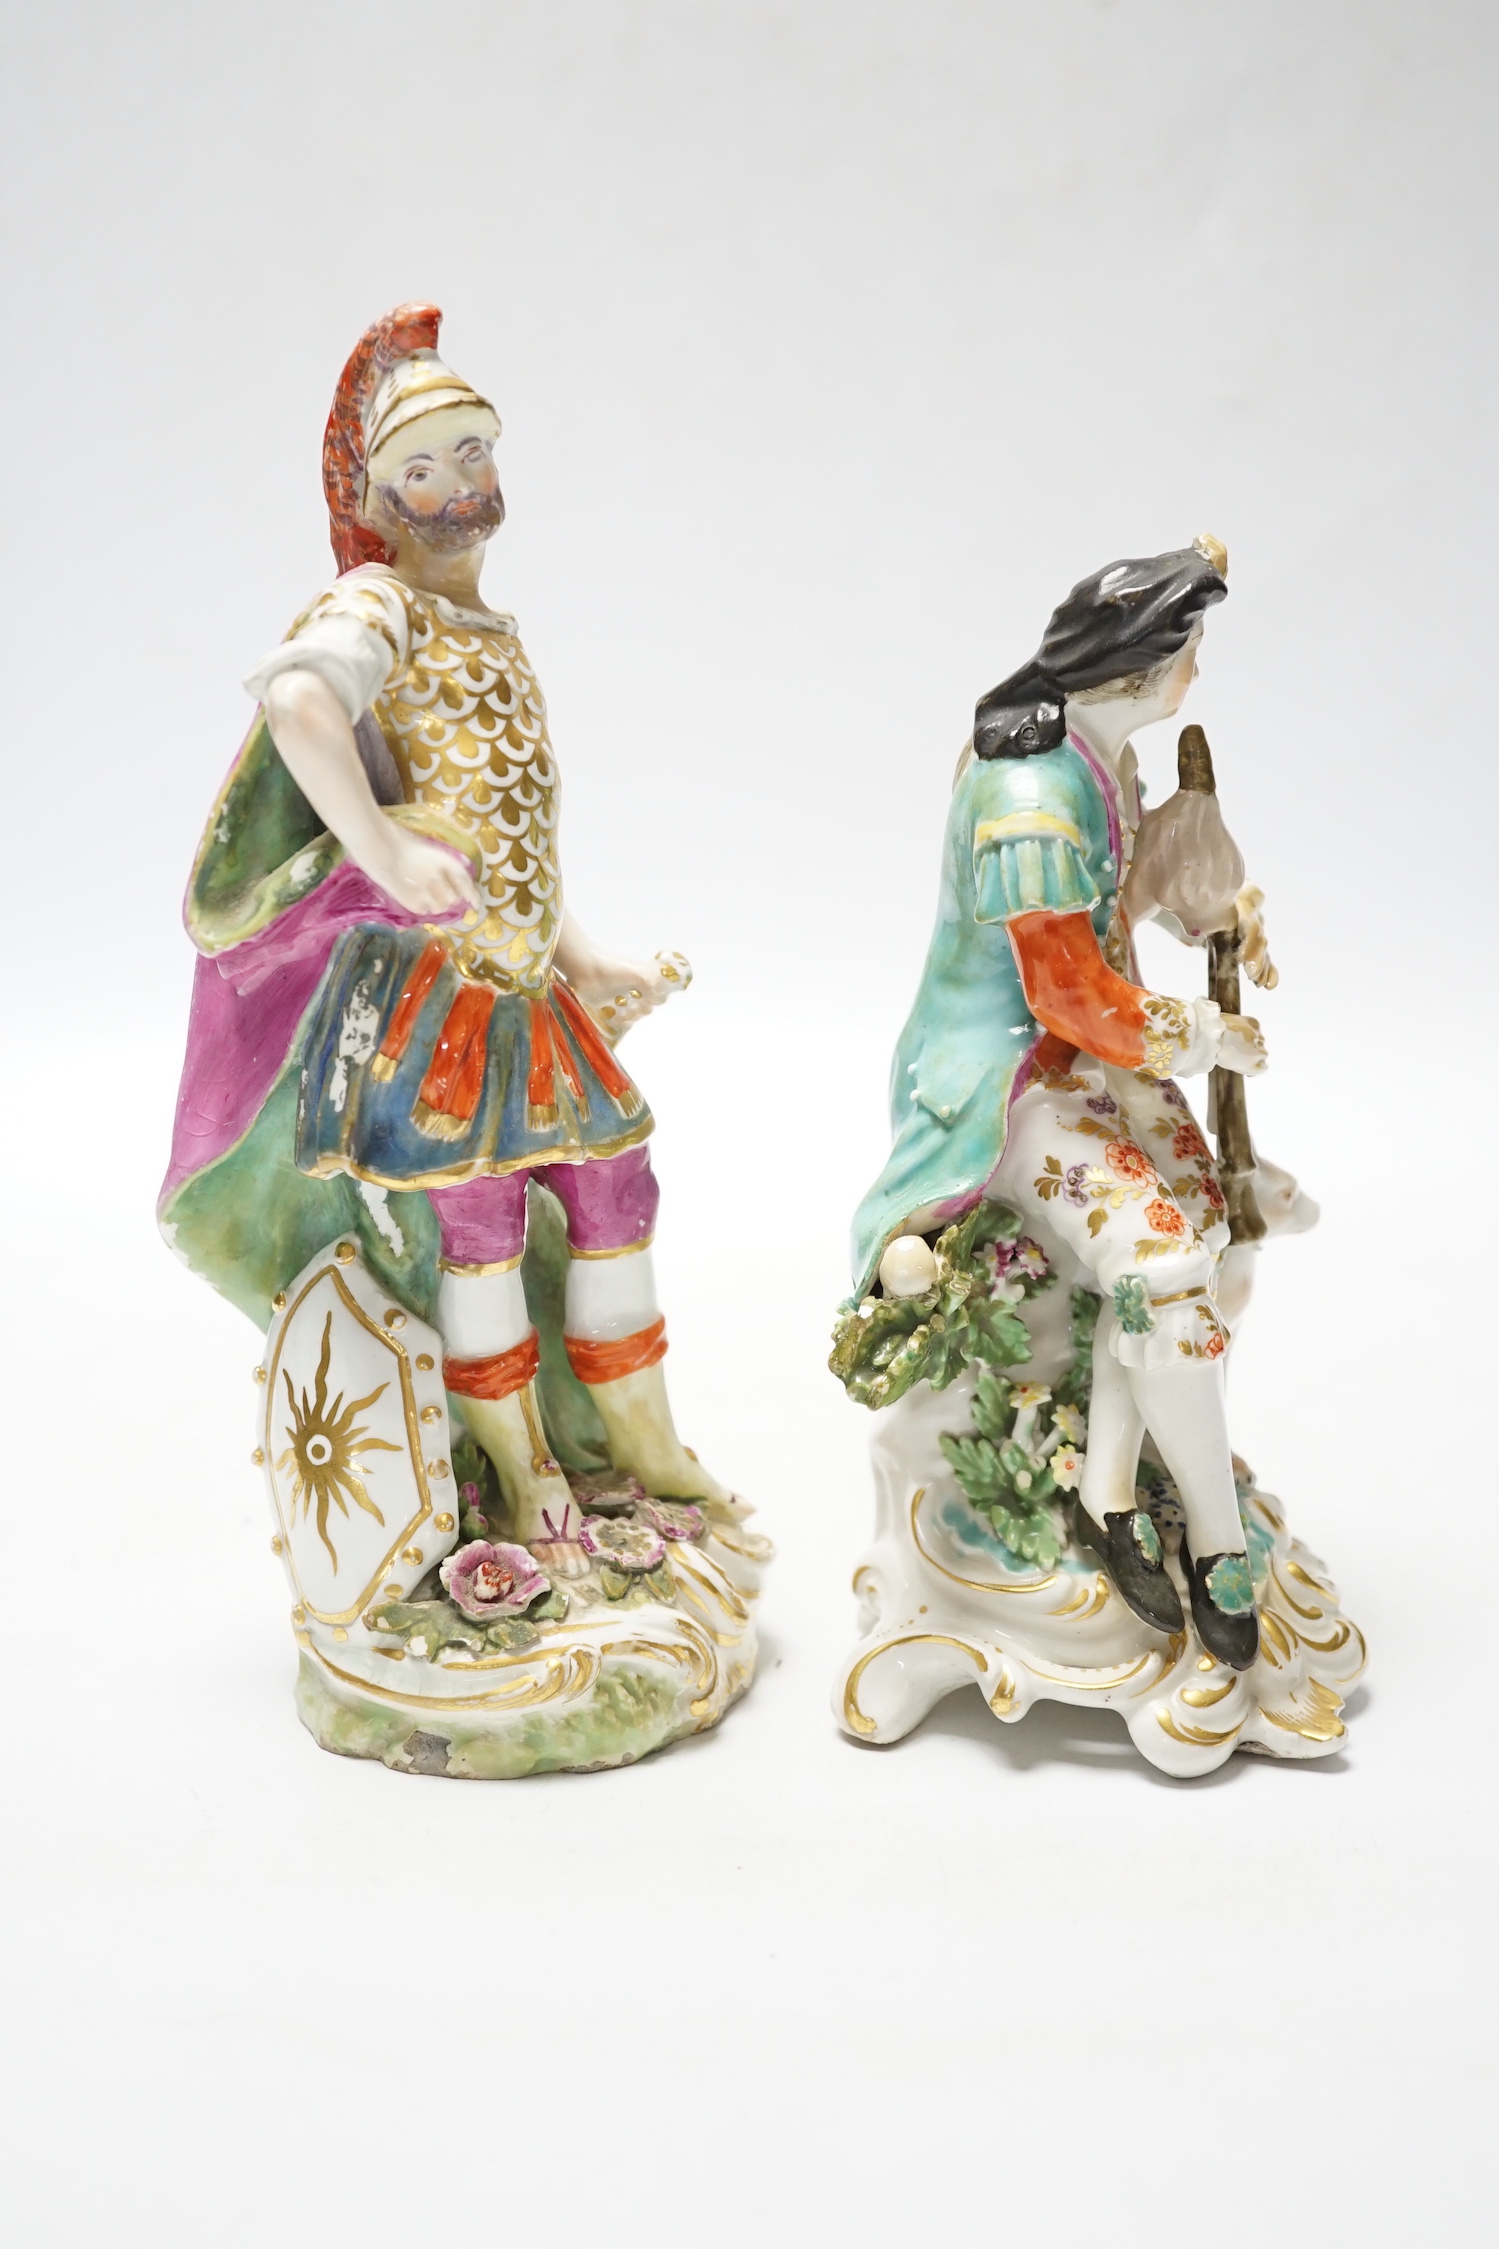 A Chelsea Gold Anchor figure of Mars, c.1760-5, and a Derby figure of a bagpiper, c.1765-70, 20cm (2)